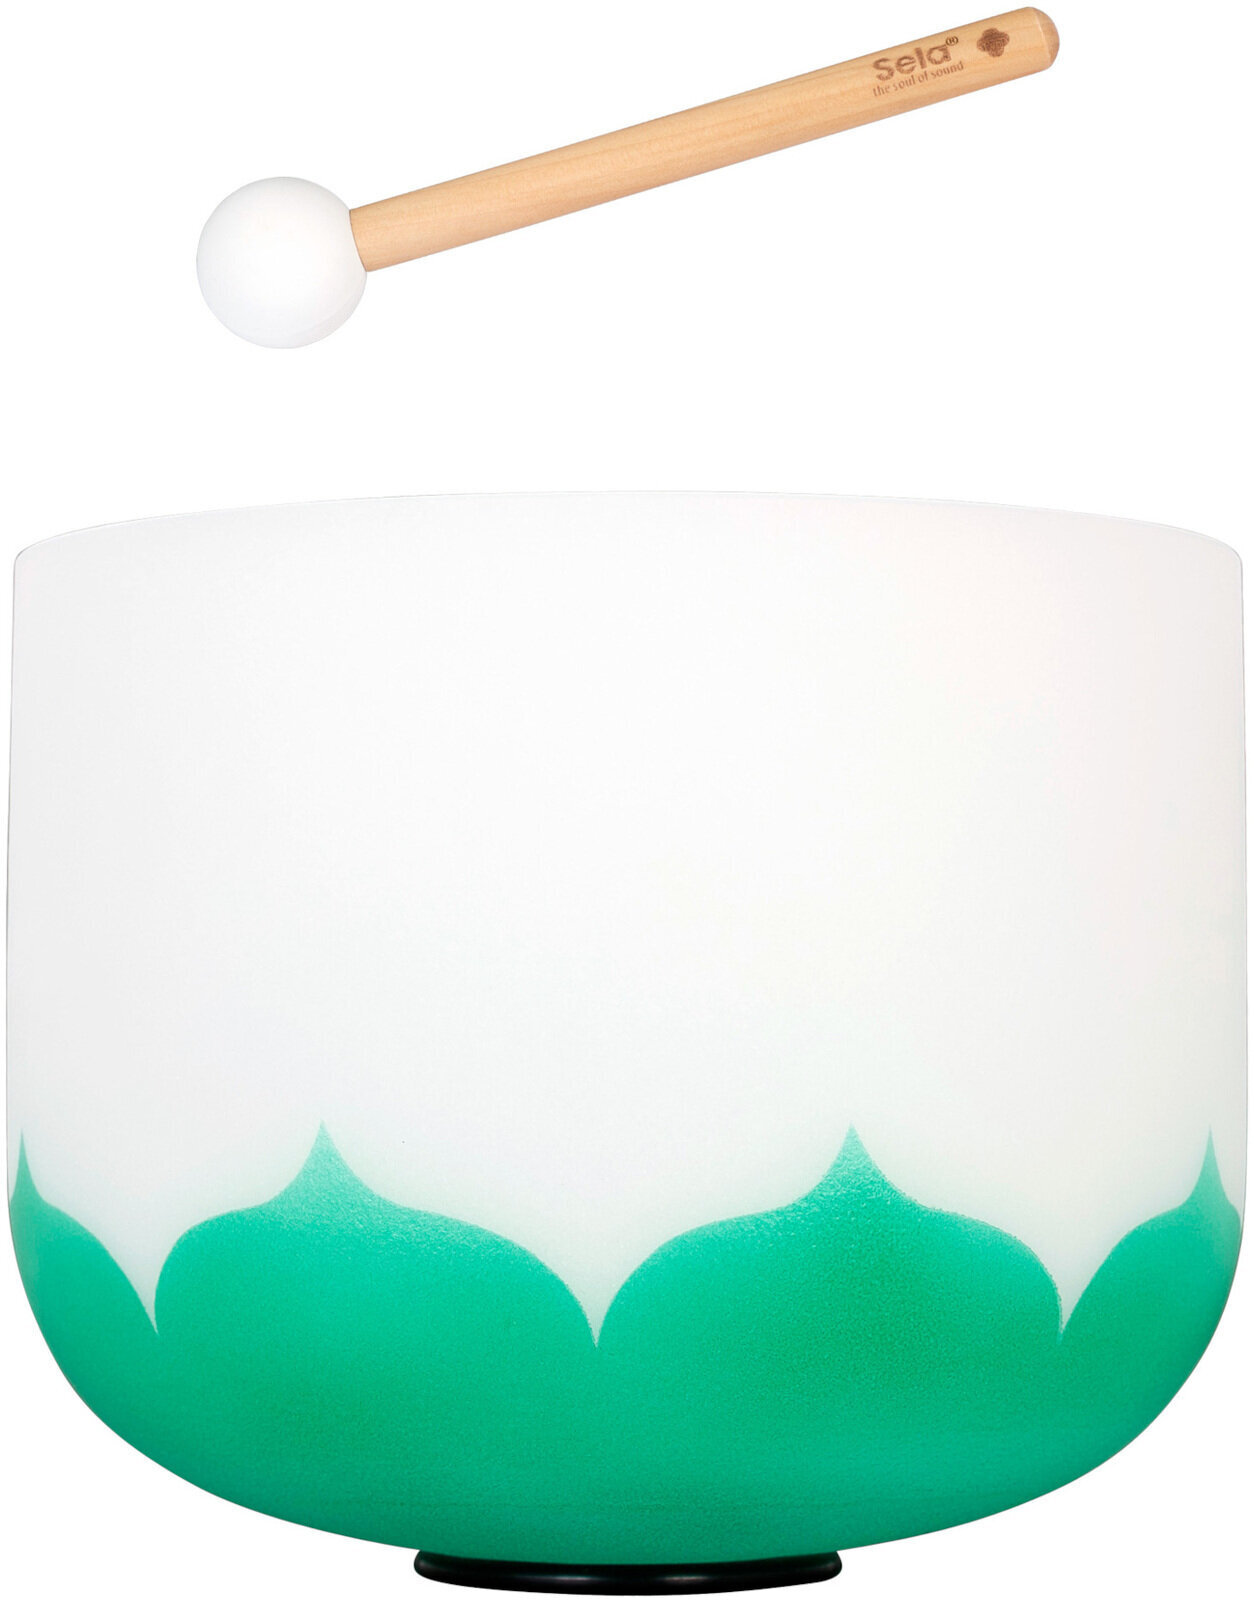 Percussion for music therapy Sela 10" Crystal Singing Bowl Lotus 440 Hz F - Green (Heart Chakra) incl. 1 Wood Mallet